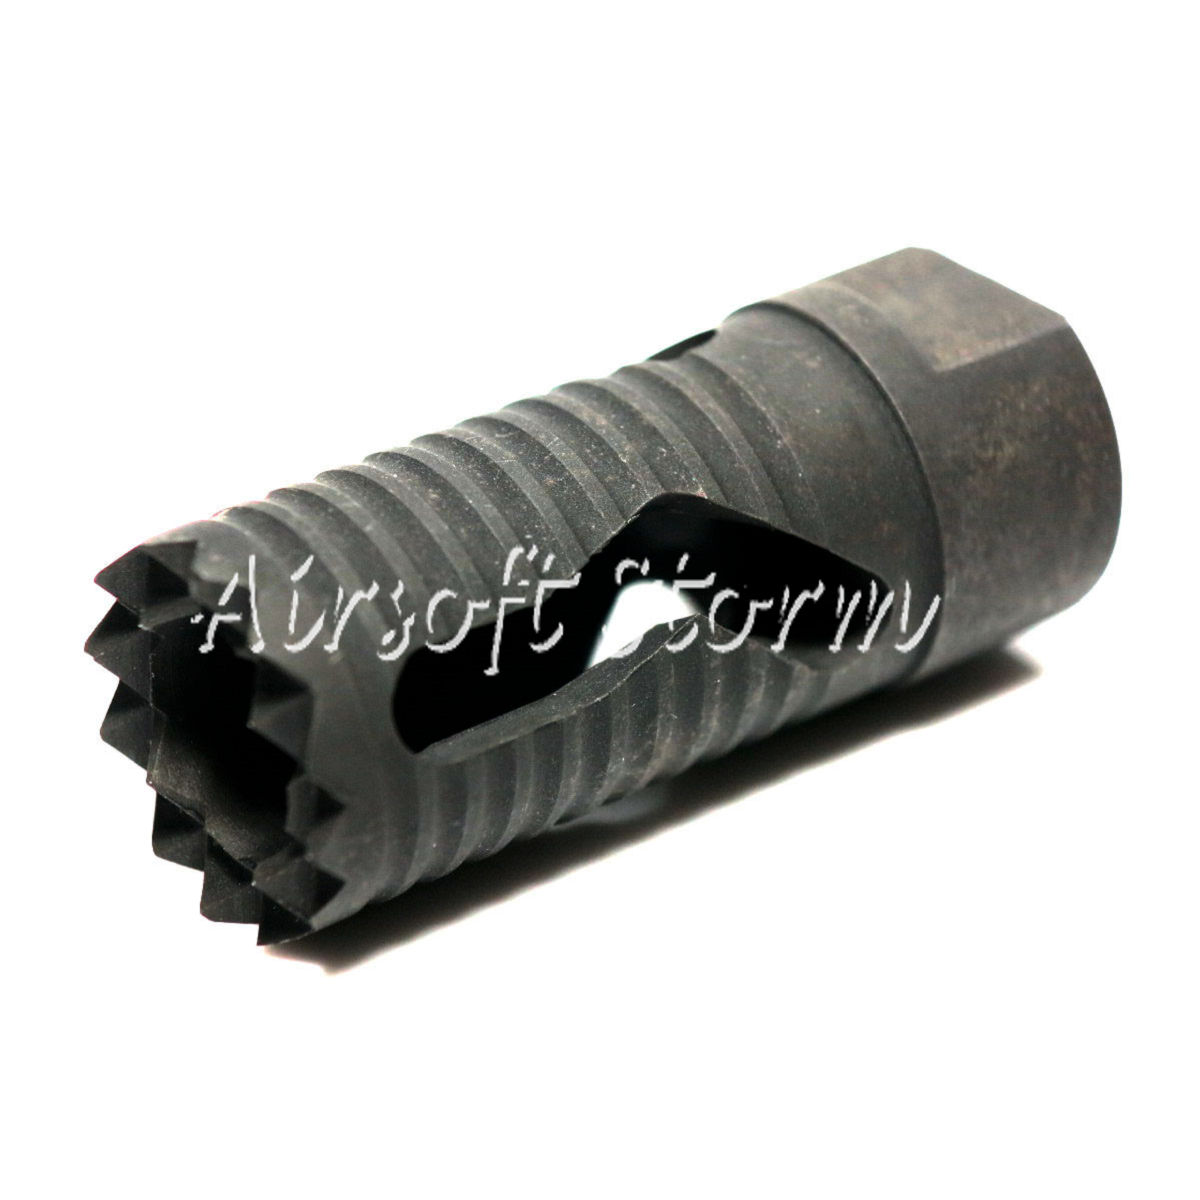 Shooting Gear Army Force Medieval Type Steel Flash Hider 14mm CCW Black - Click Image to Close